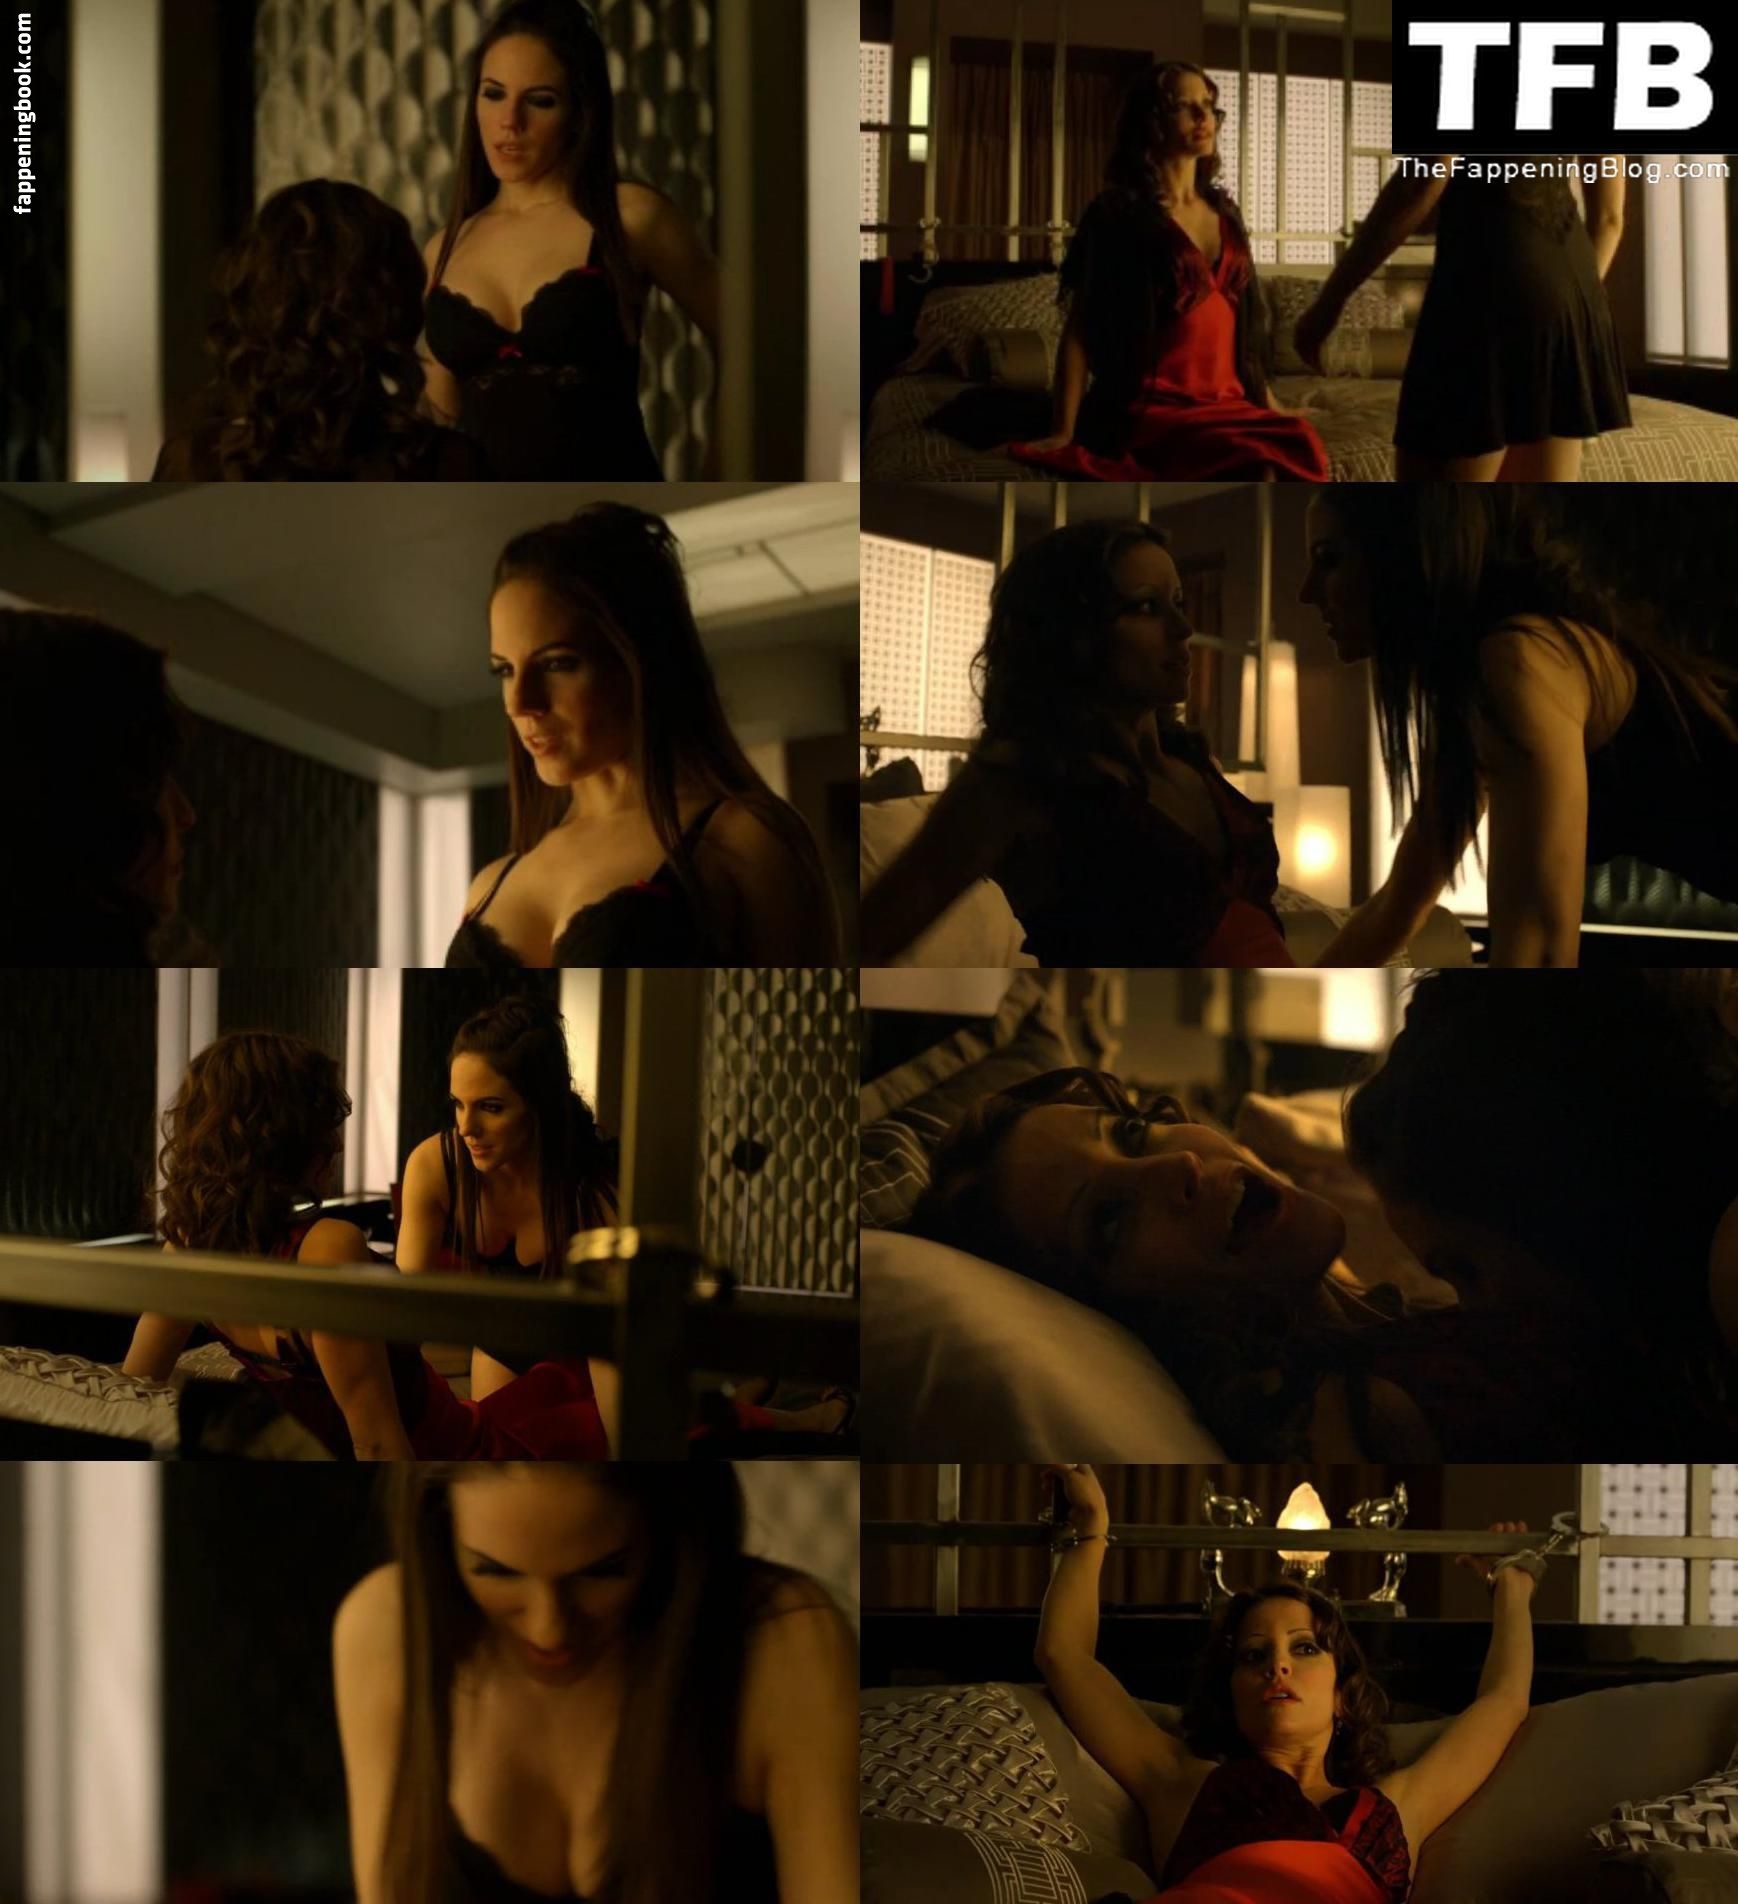 Anna Silk Nude, The Fappening - Photo #1516329 - FappeningBook